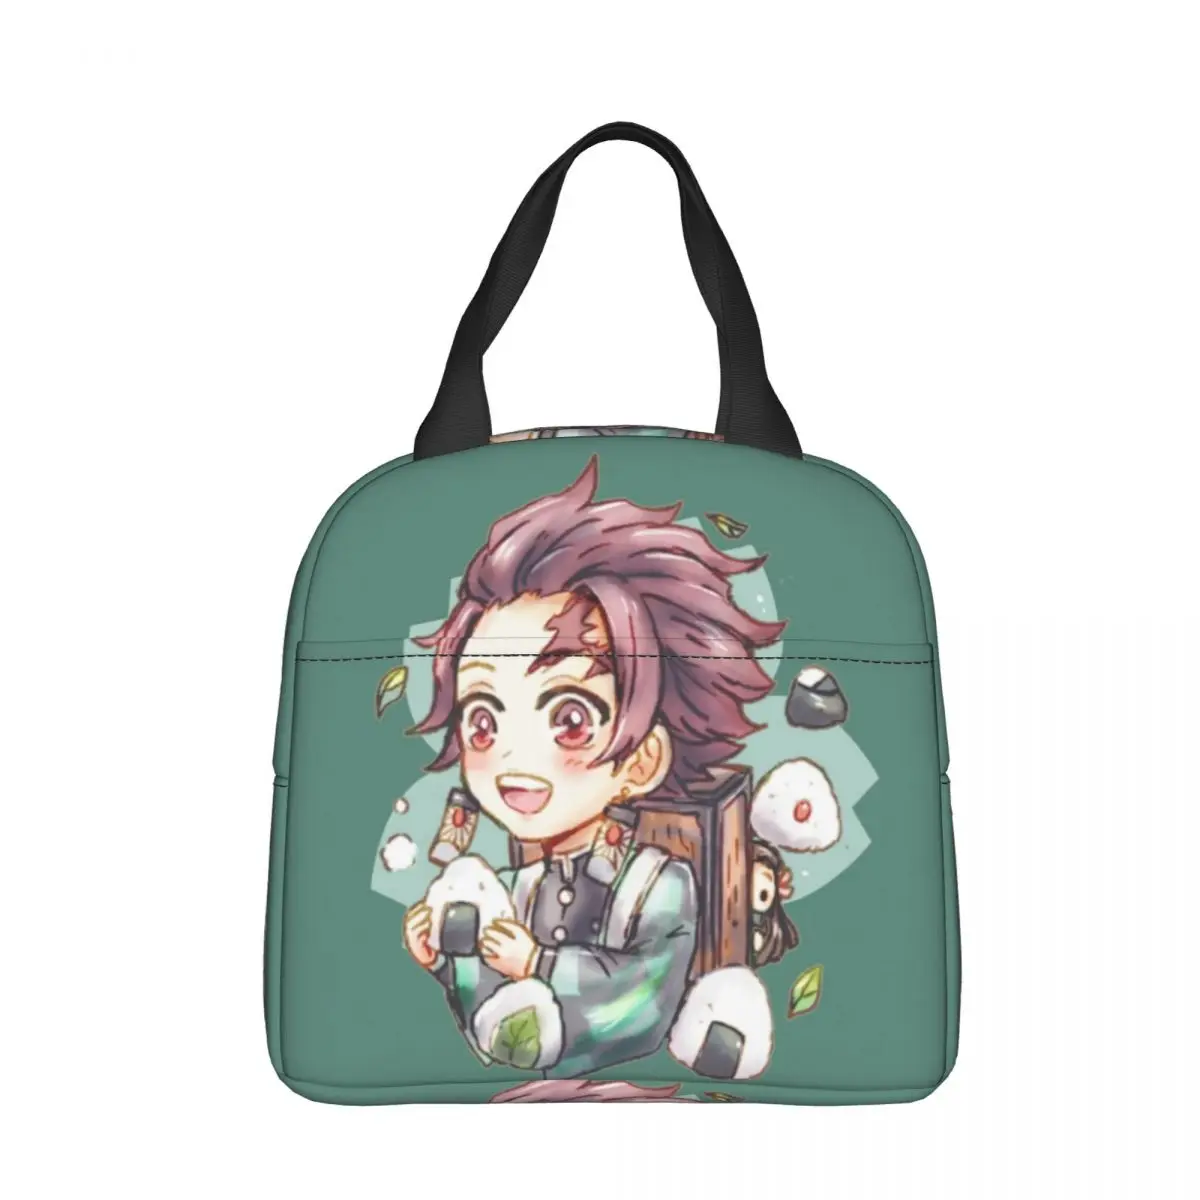 

Insulated Lunch Bags Leakproof Kimetsu no Yaiba Demon Slayer Reusable Cooler Bag Lunch Box Tote Beach Outdoor Bento Pouch